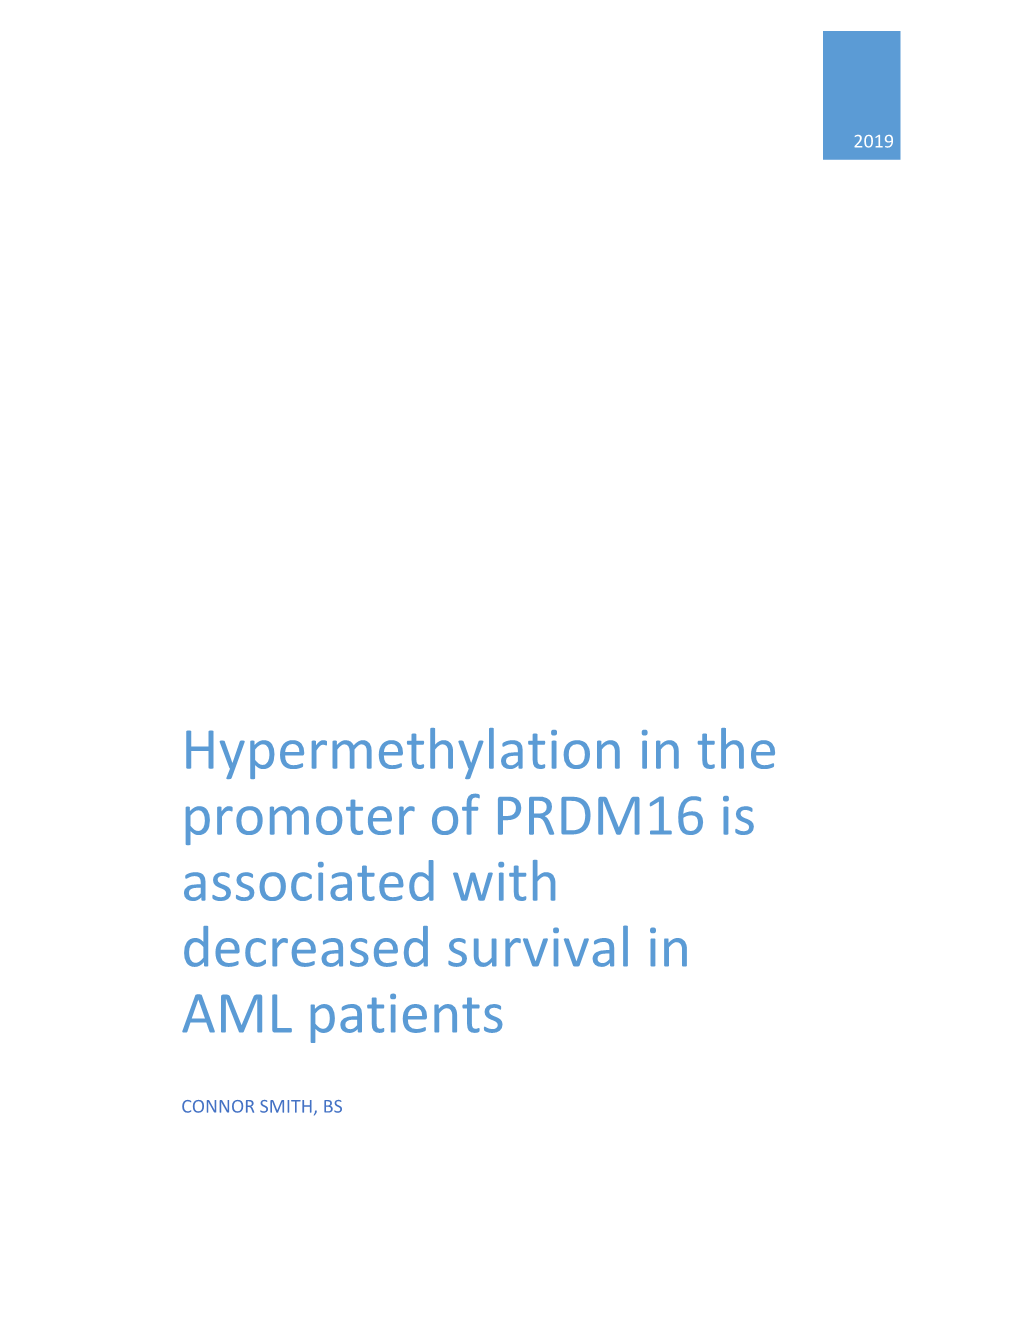 Hypermethylation in the Promoter of PRDM16 Is Associated with Decreased Survival in AML Patients